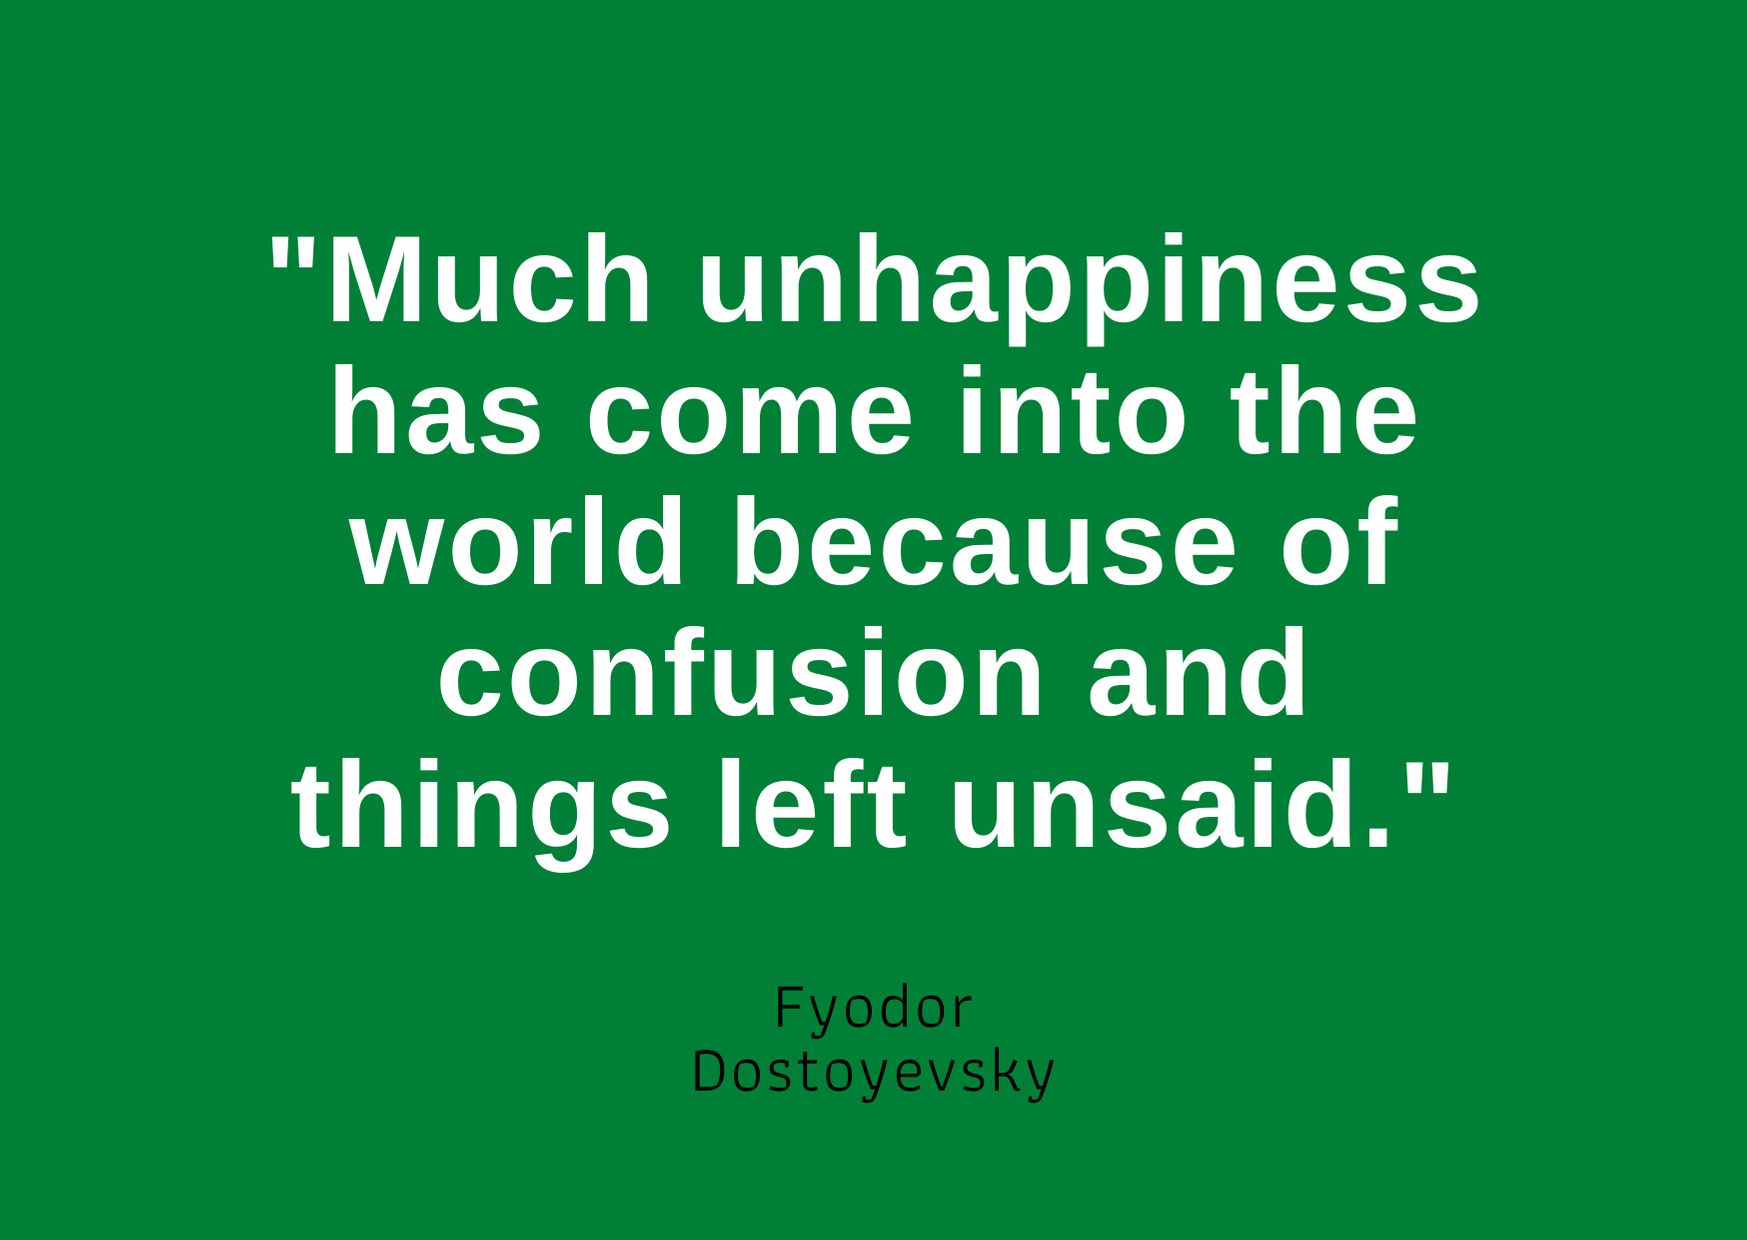 La imagen muestra una frase del escritor Dostoievski: “Much unhappiness has come into the world because of confusion and things left unsaid” .